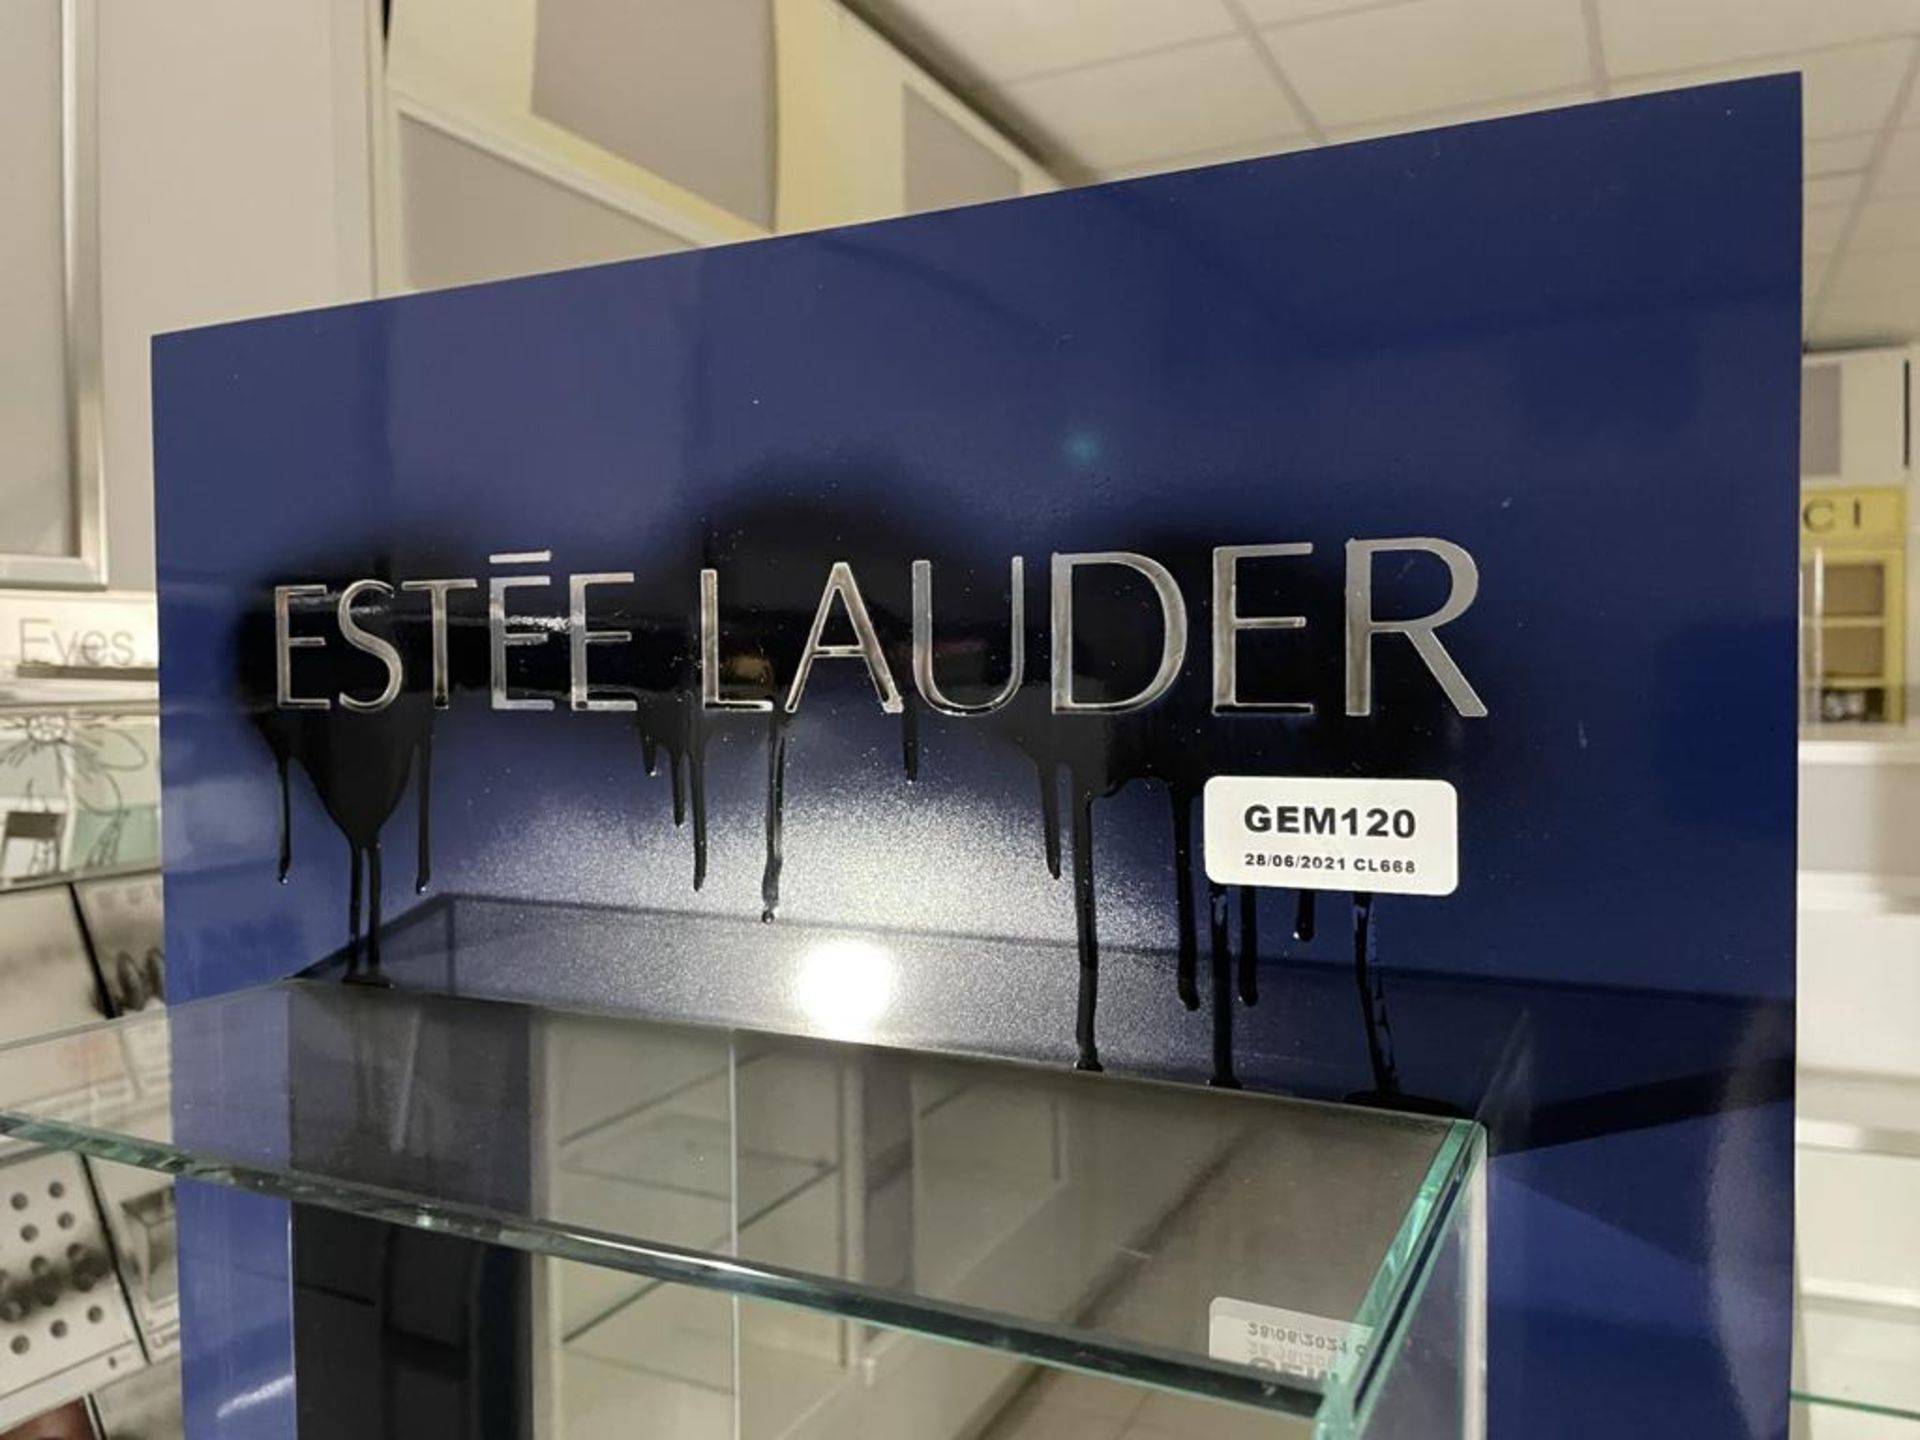 1 x Estee Lauder Free Standing Retail Display Unit With Glass Cube Display Shelves - Size H175 x W49 - Image 4 of 8